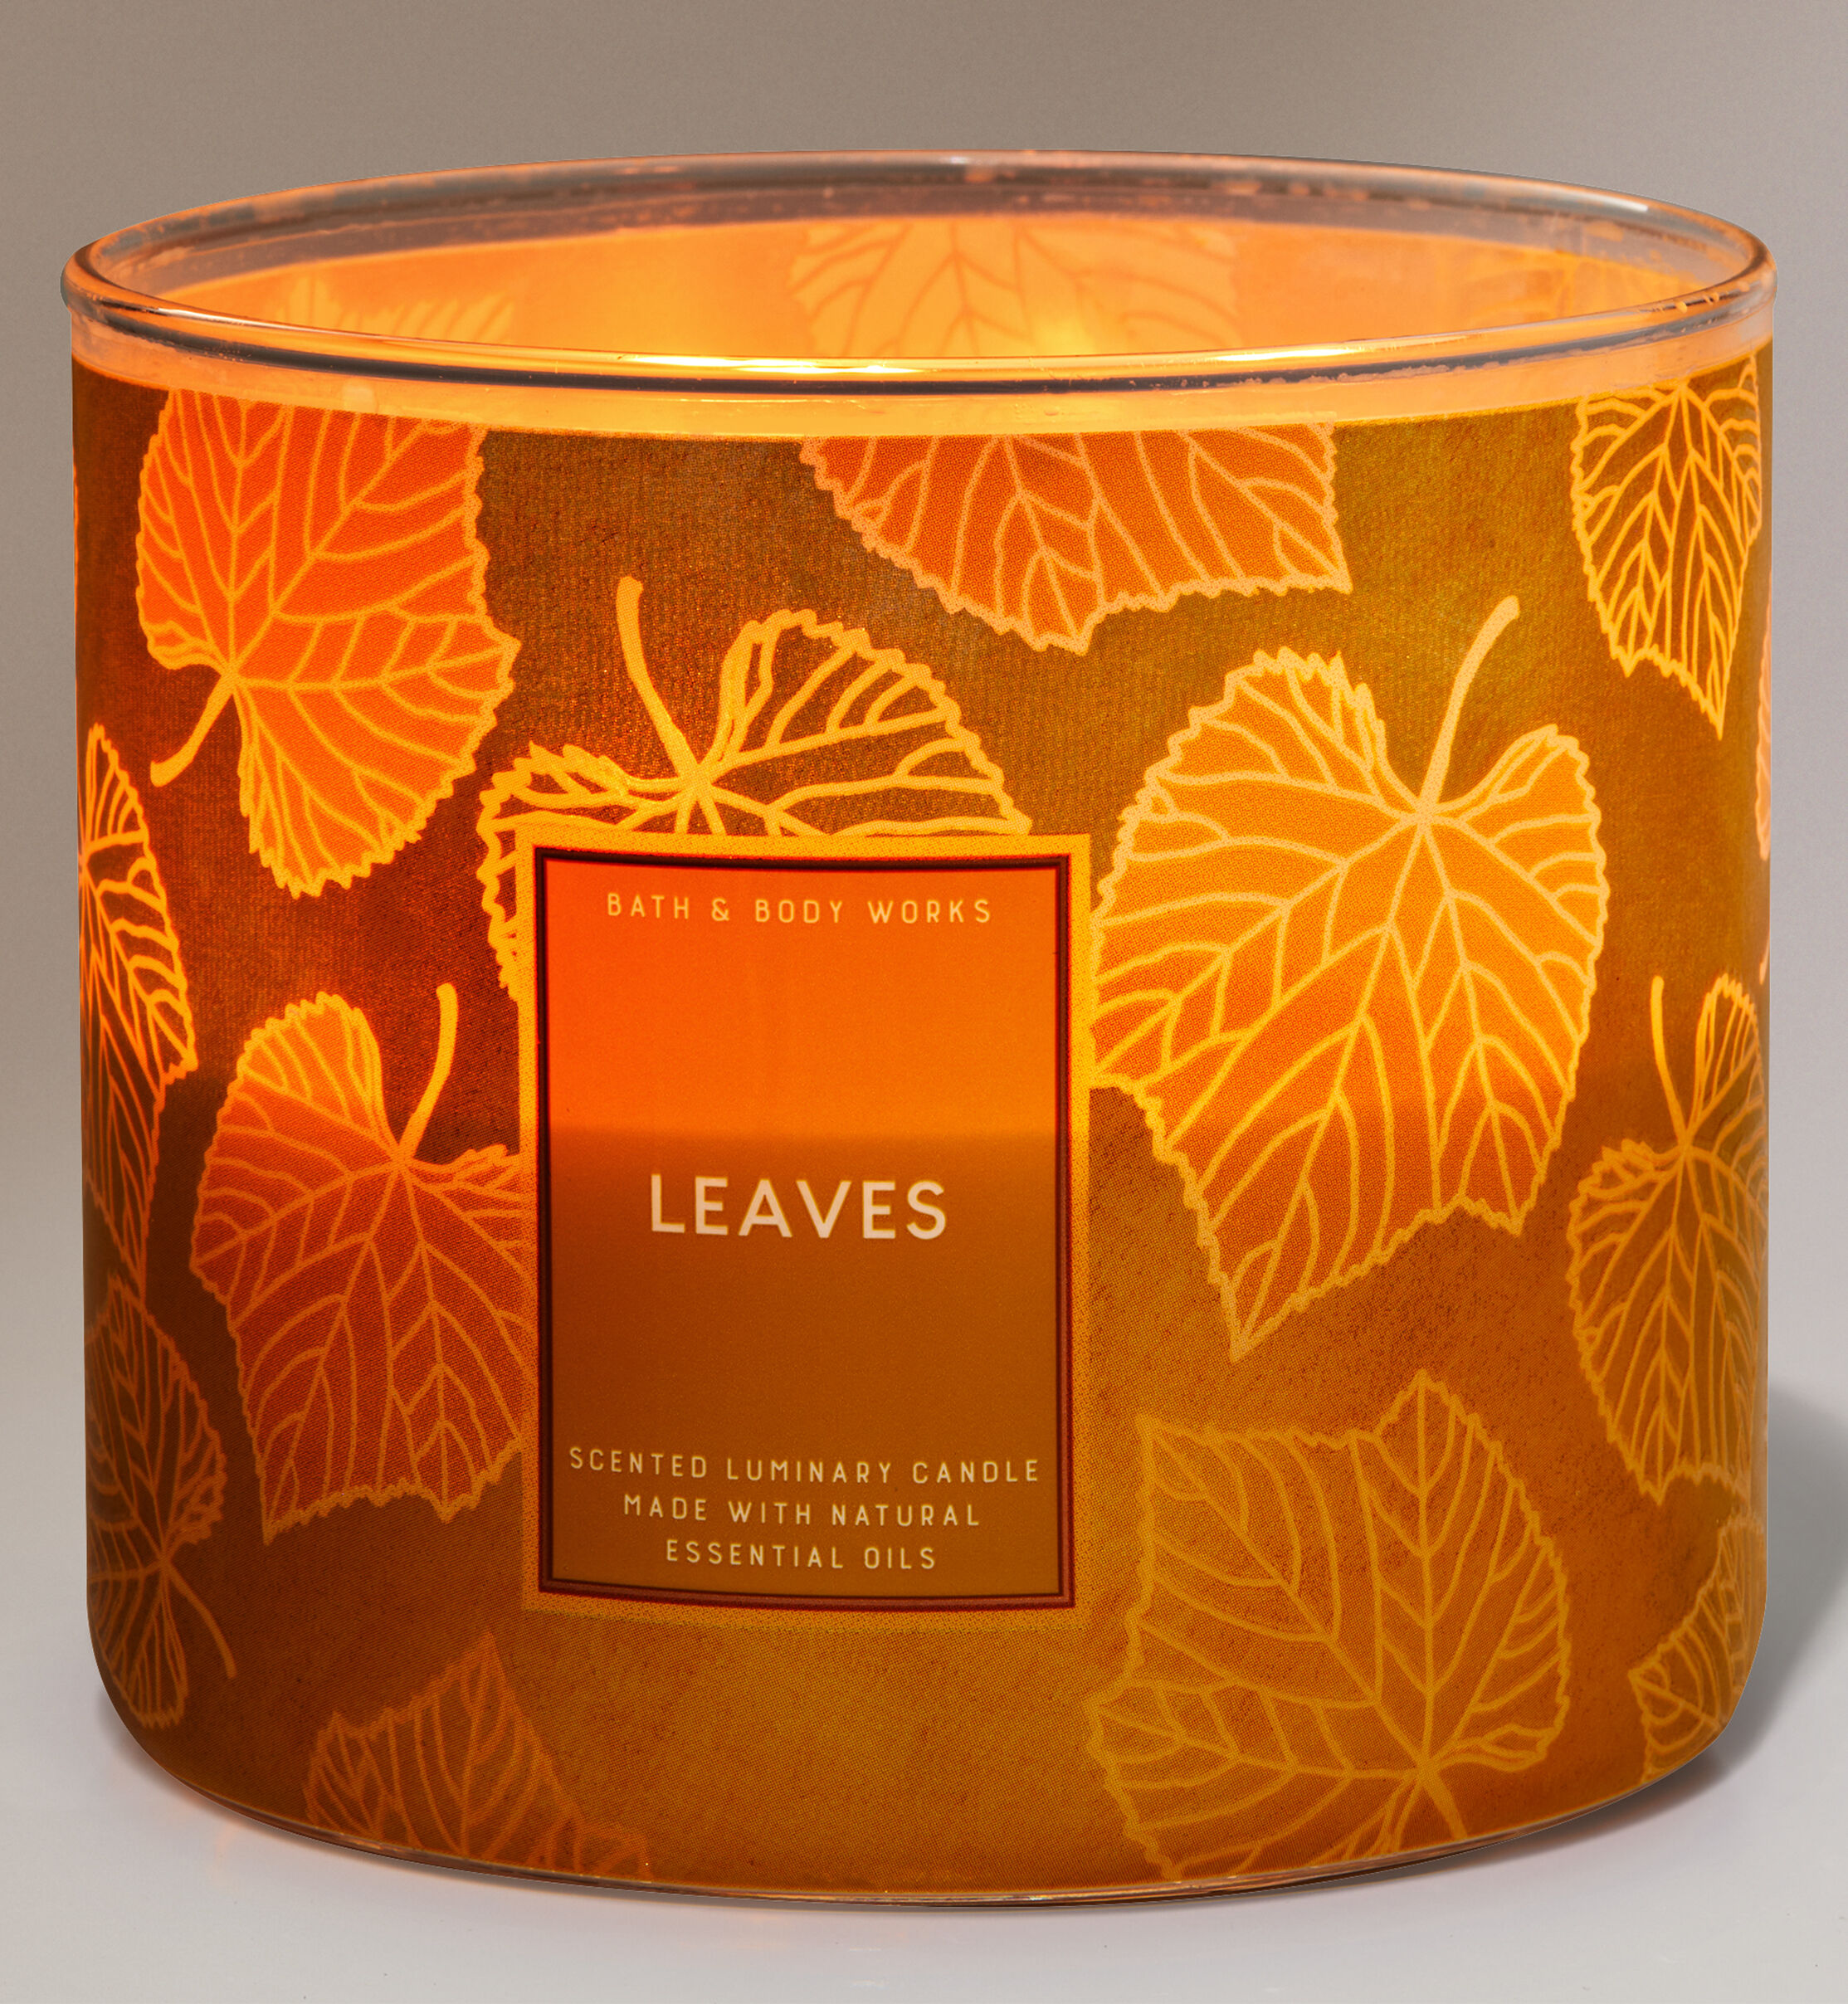 1 Bath & Body Works AUTUMN TRAIL Large 3-Wick Filled Candle 